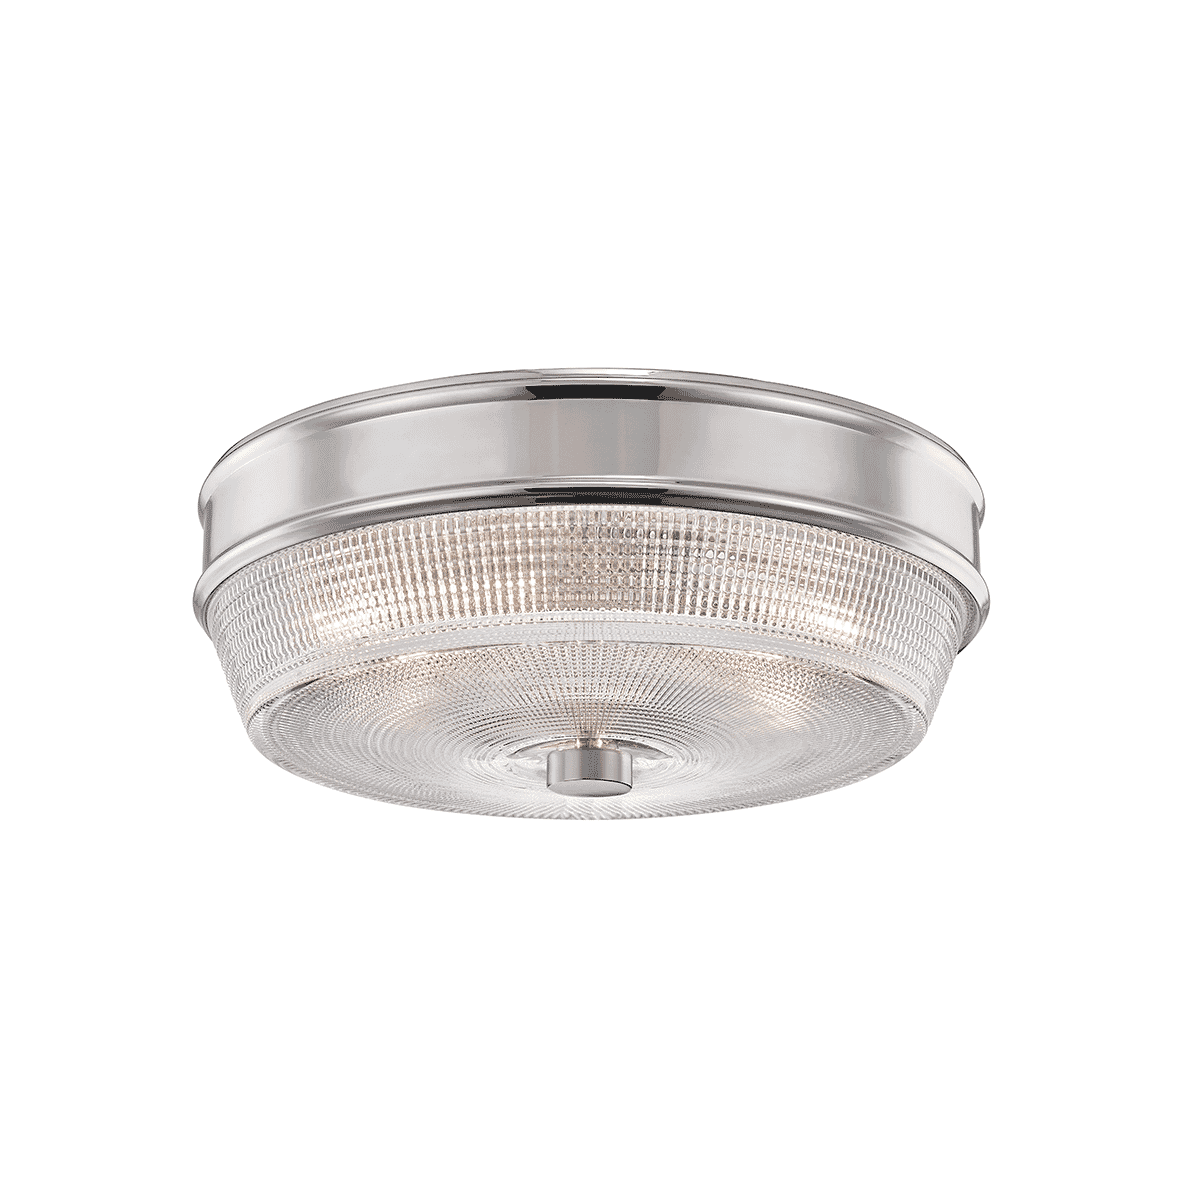 Mitzi Lacey Ceiling Light in Polished Nickel